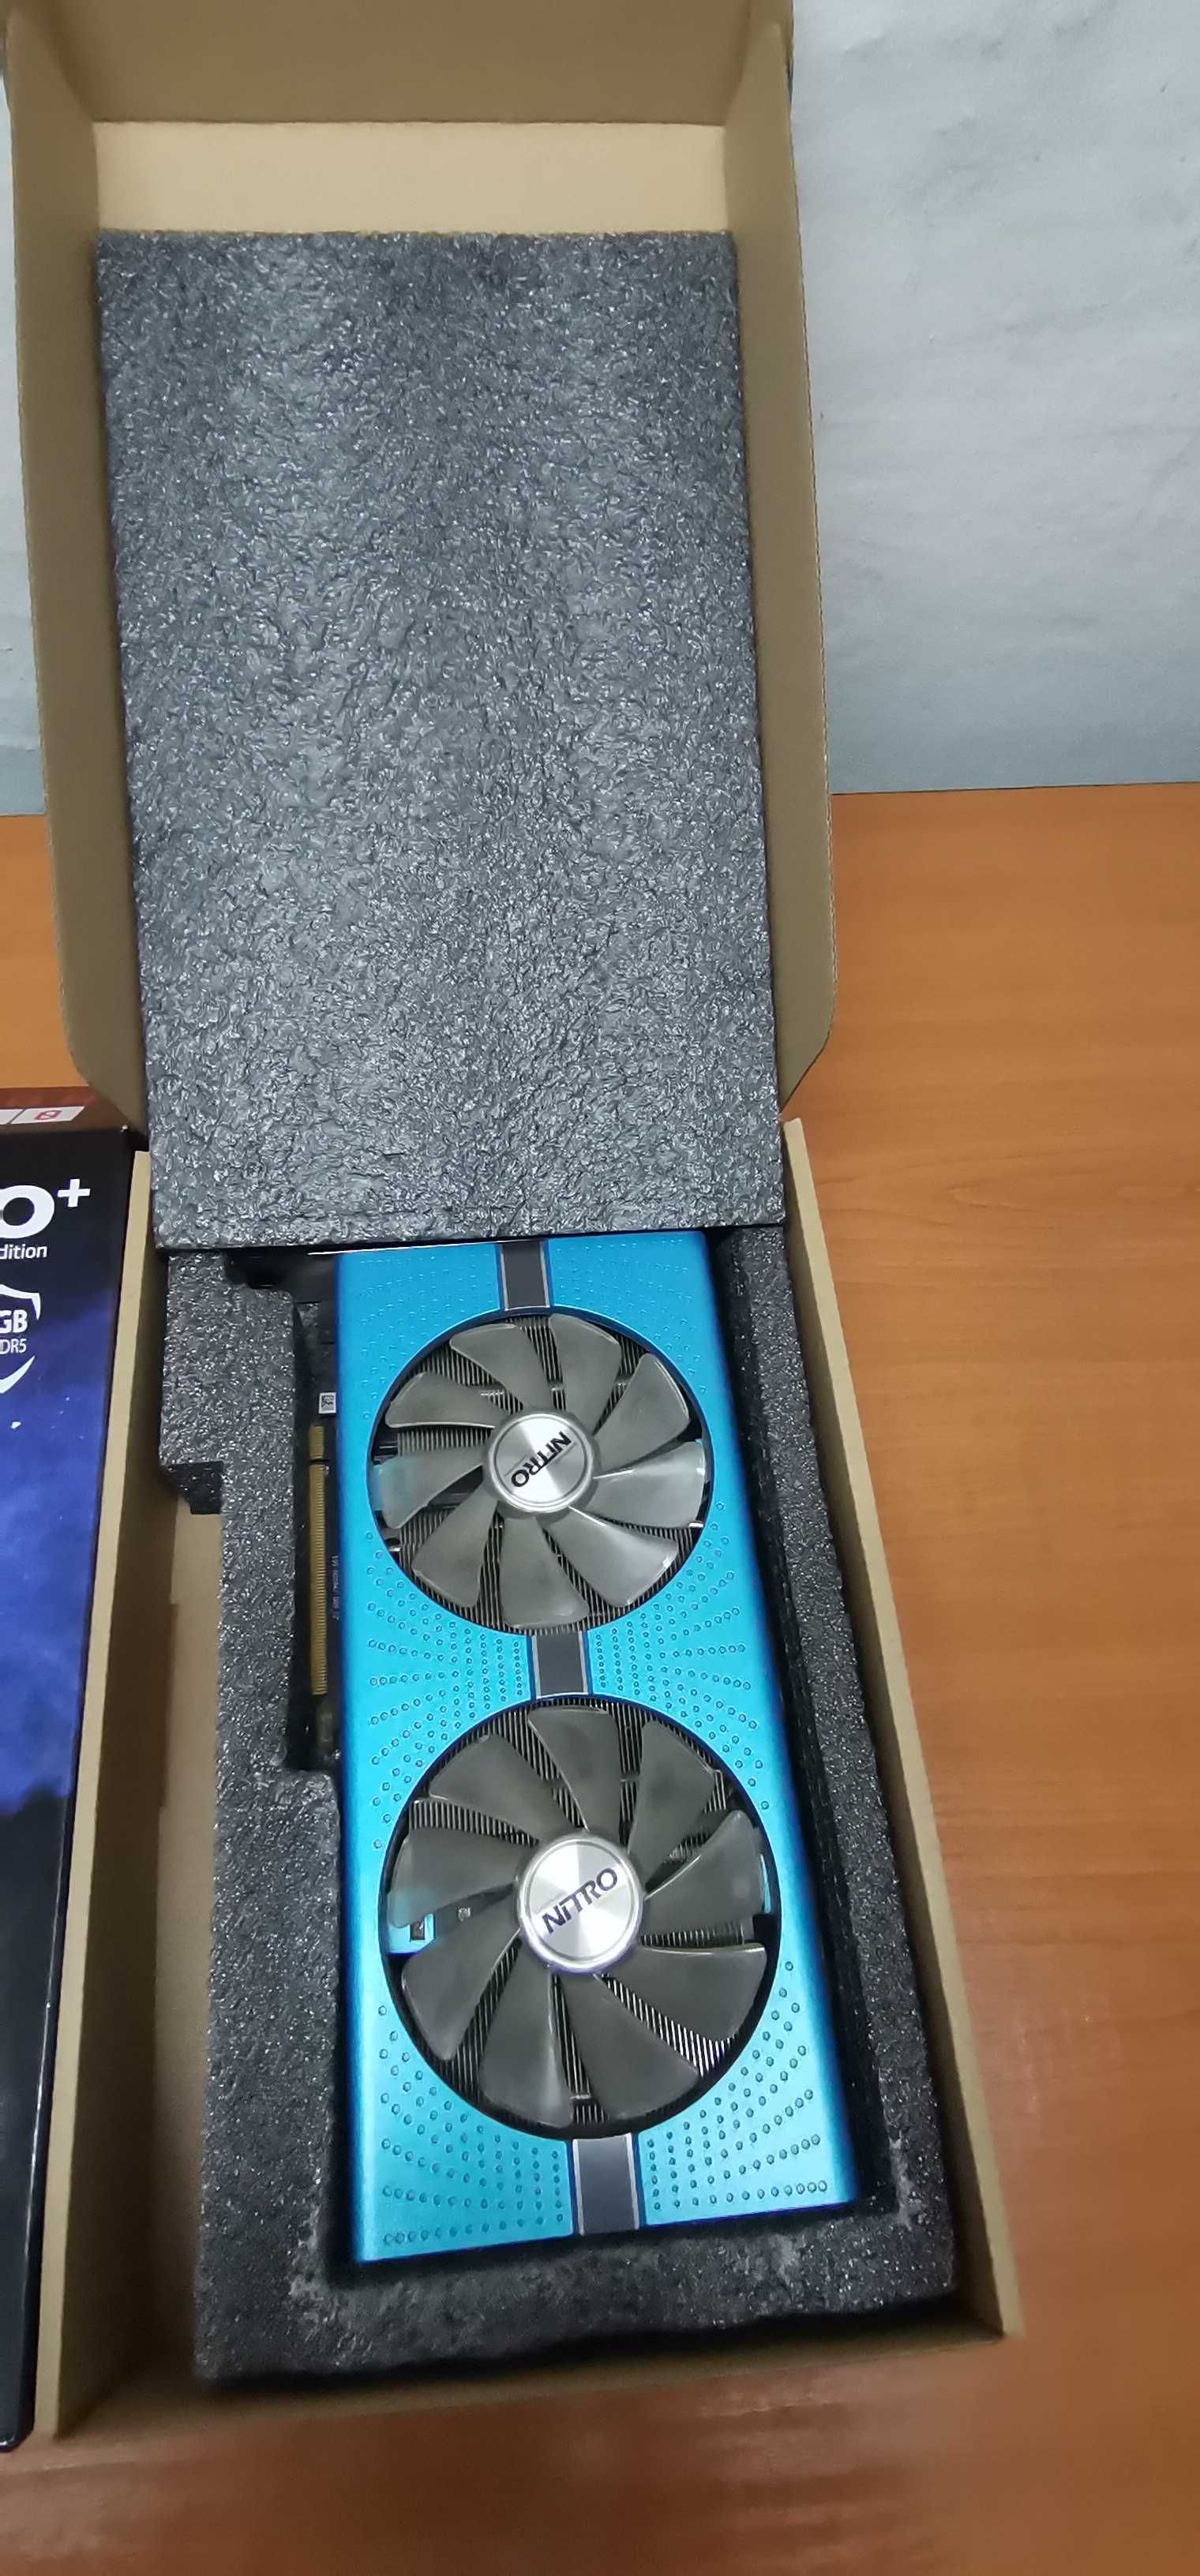 Sapphire RX580 8G Special Edition